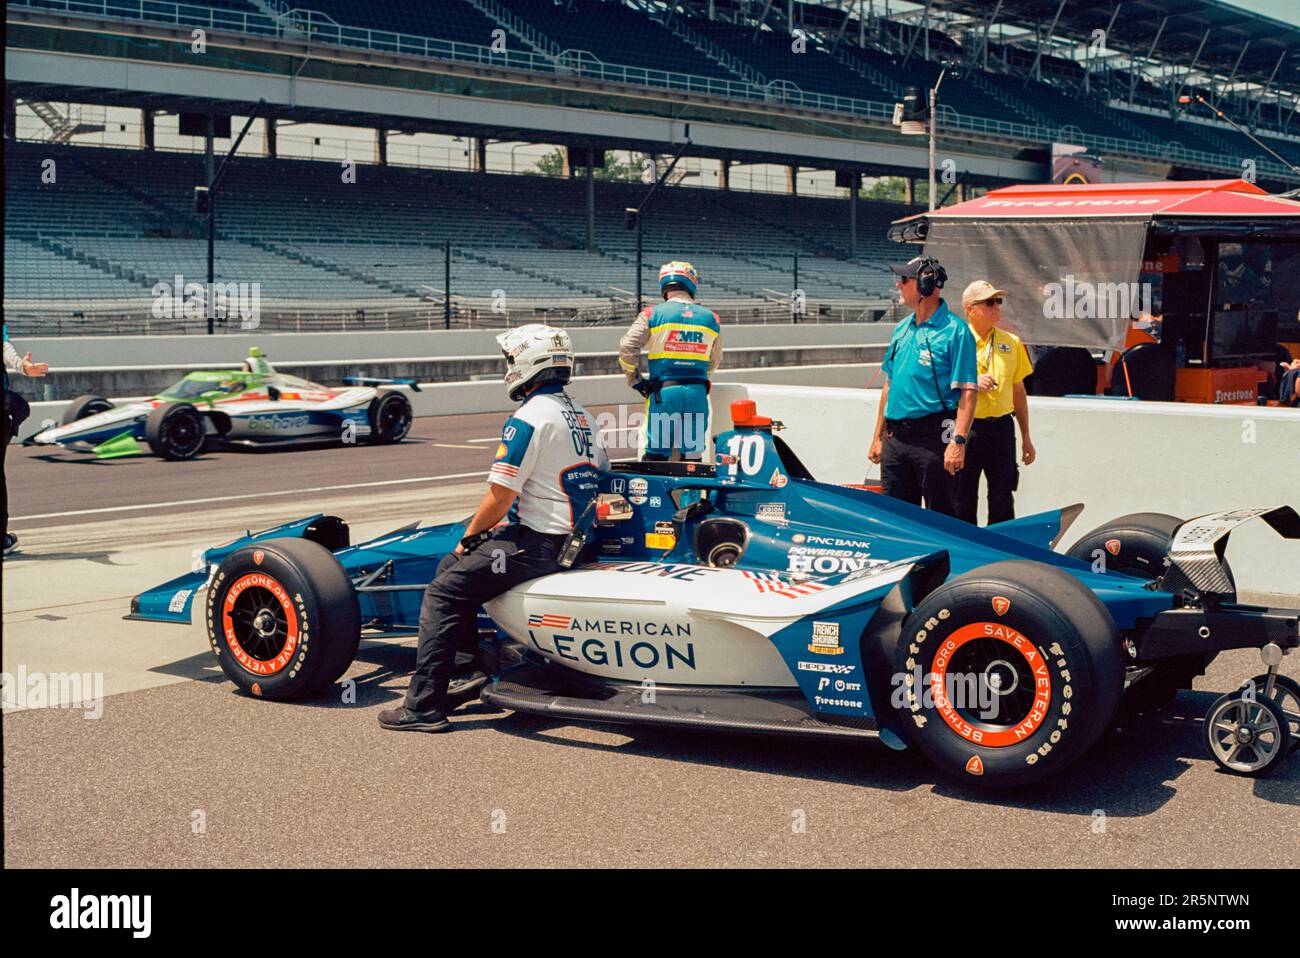 INDIANAPOLIS, INDIANA, UNITED STATES - 2023/05/22: Crews members for Chip Ganassi Racing driver Álex Palou (10) of Spain push his car to pit row during practice for the 2023 Indy 500 at Indianapolis Motor Speedway in Indianapolis. (Photo by Jeremy Hogan/The Bloomingtonian) Stock Photo